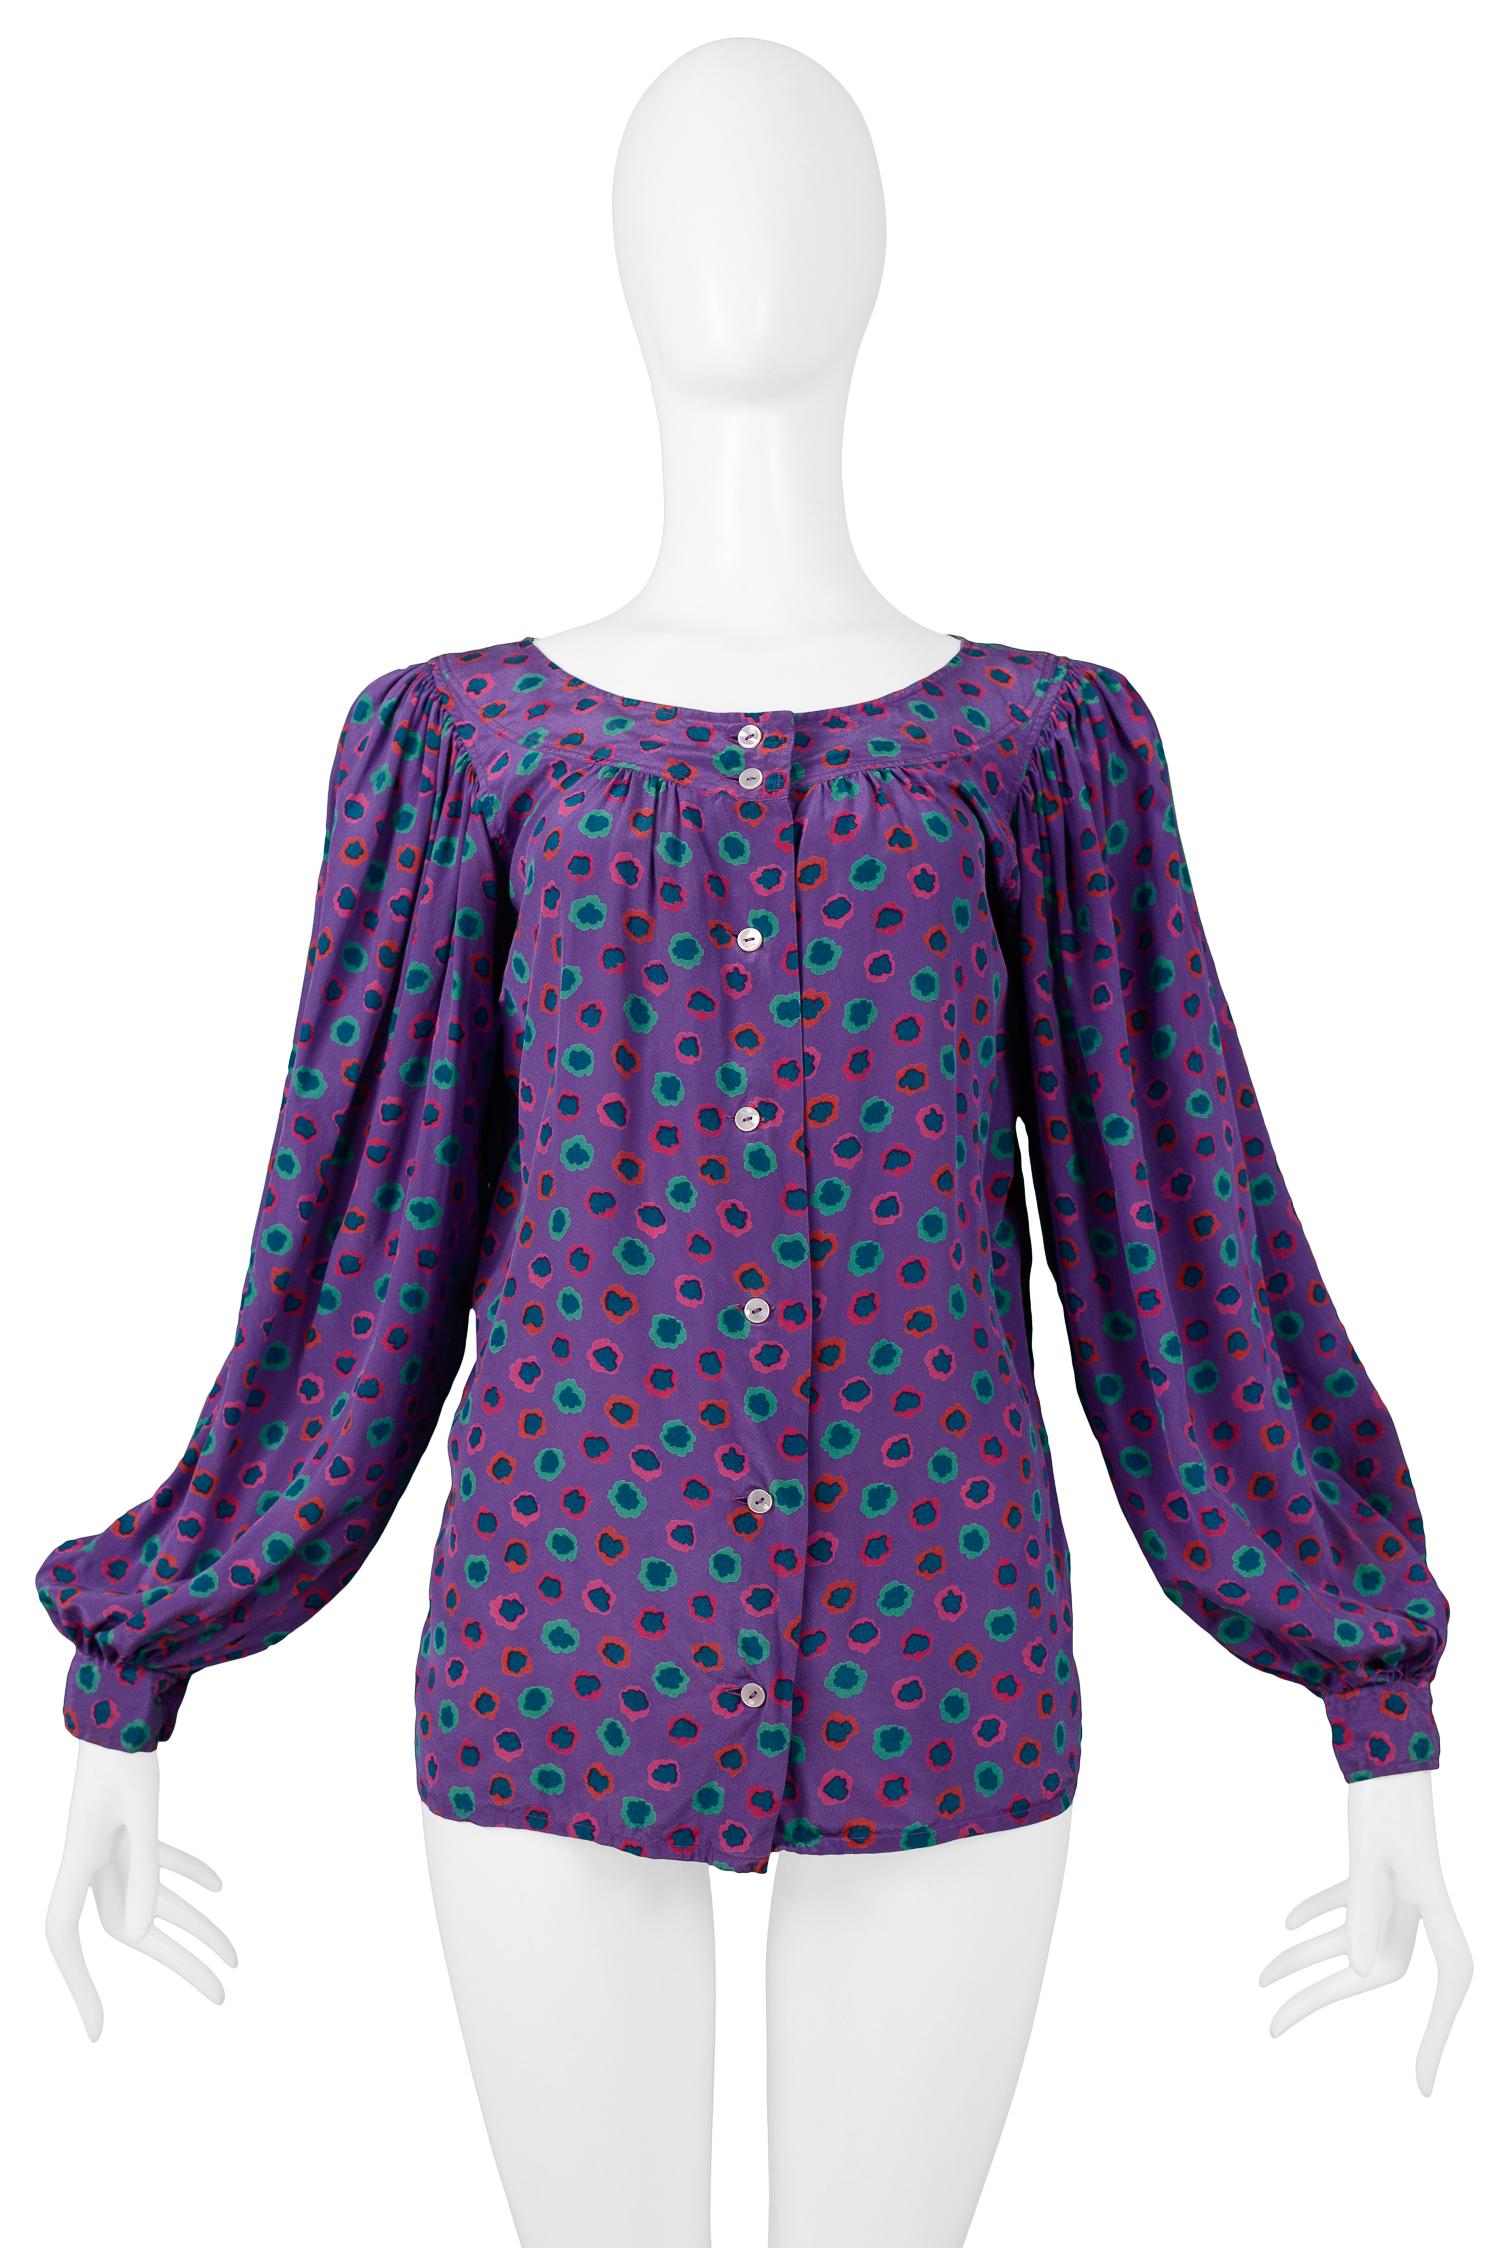 Vintage Yves Saint Laurent purple silk peasant blouse featuring a pink & green floral print, button front closure and blouson cuffed sleeves.

Condition: Excellent Condition

Size: 40